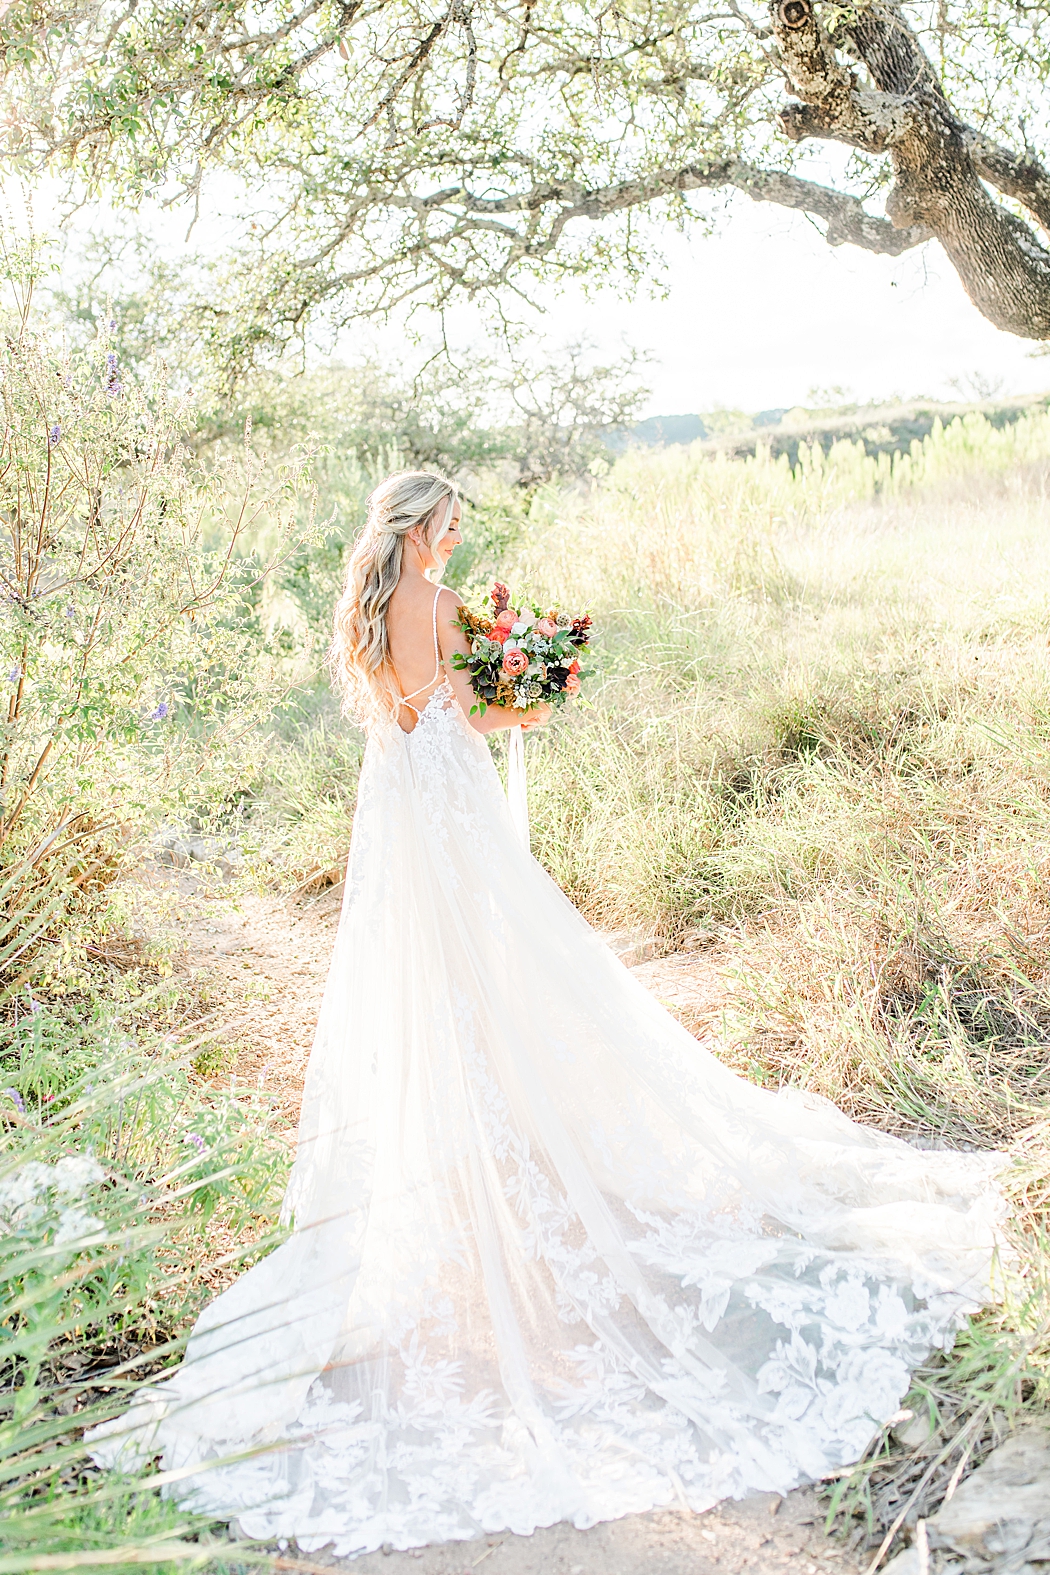 Summer Bridal Session at Contigo Ranch in Frederickburg Texas by Allison Jeffers Photography 0003